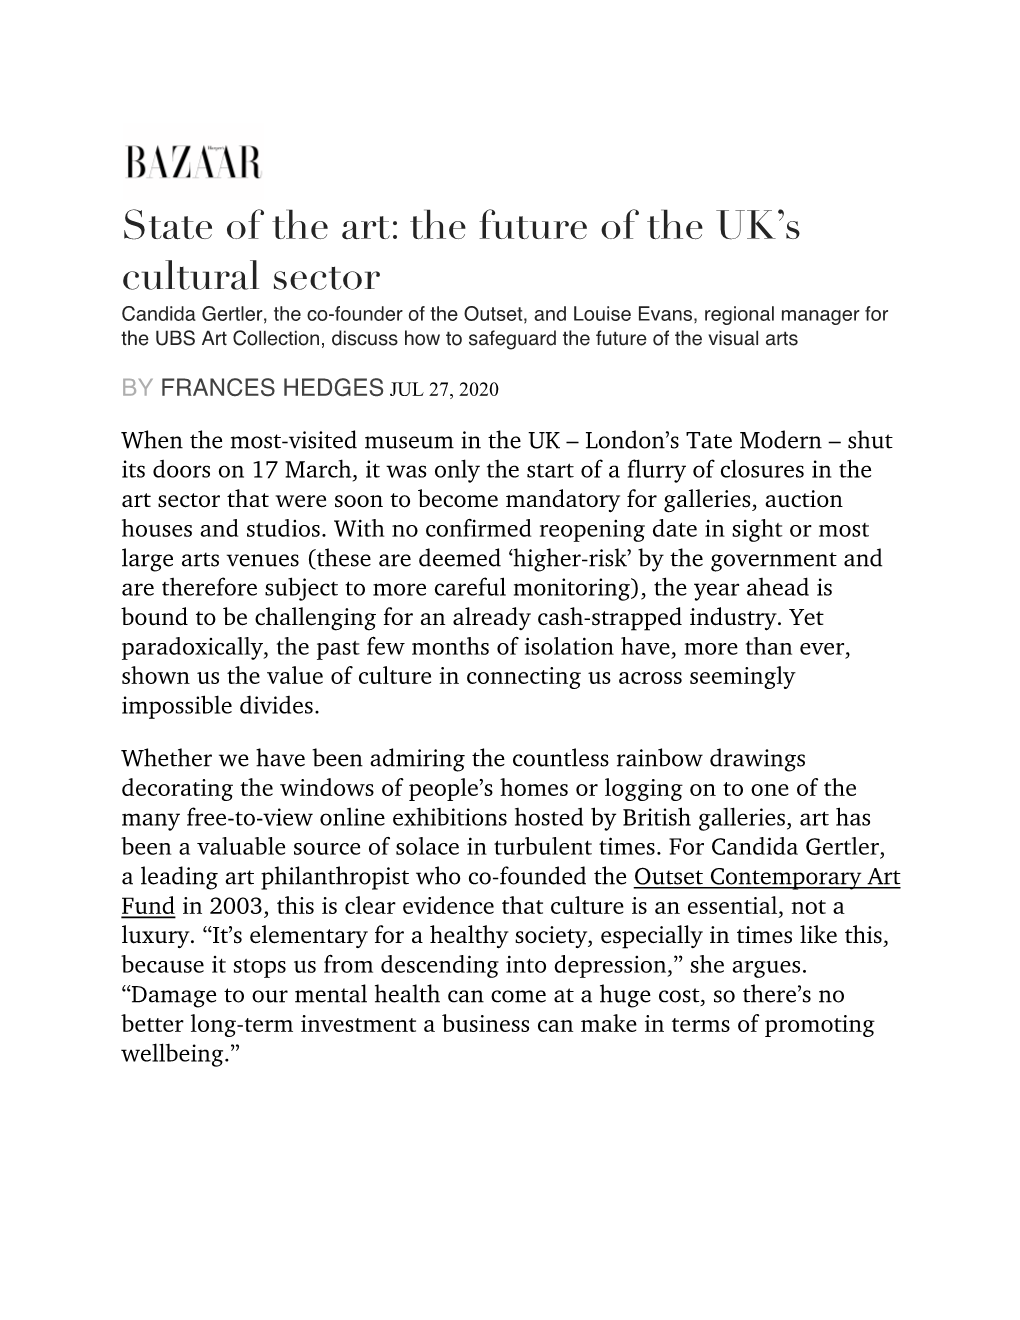 State of the Art: the Future of the UK's Cultural Sector